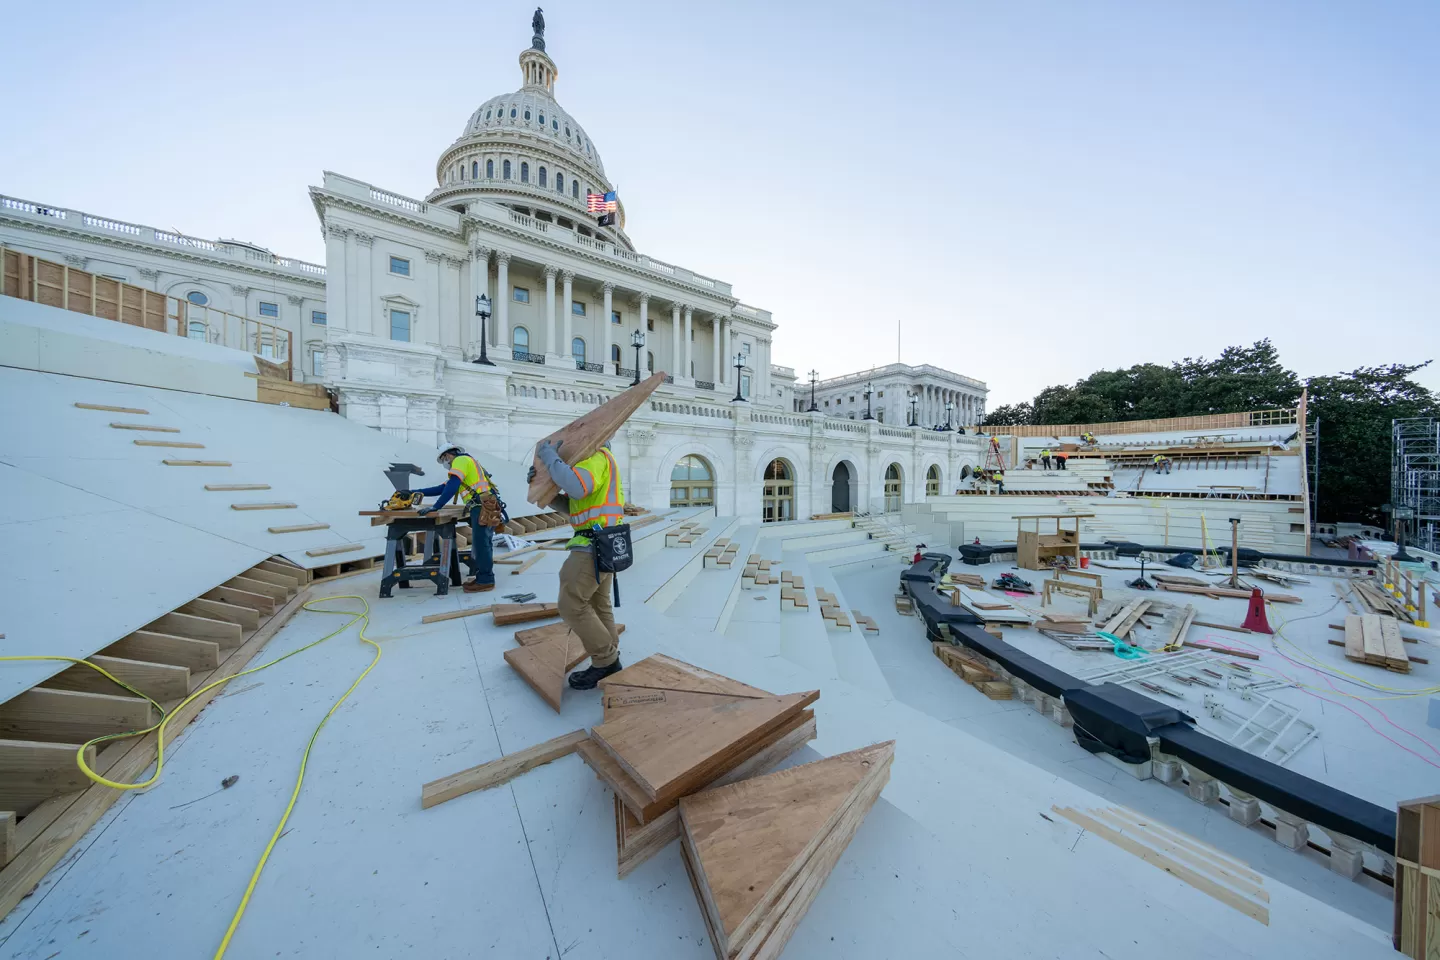 View of the north congressional stand under construction for the 2021 inauguration.